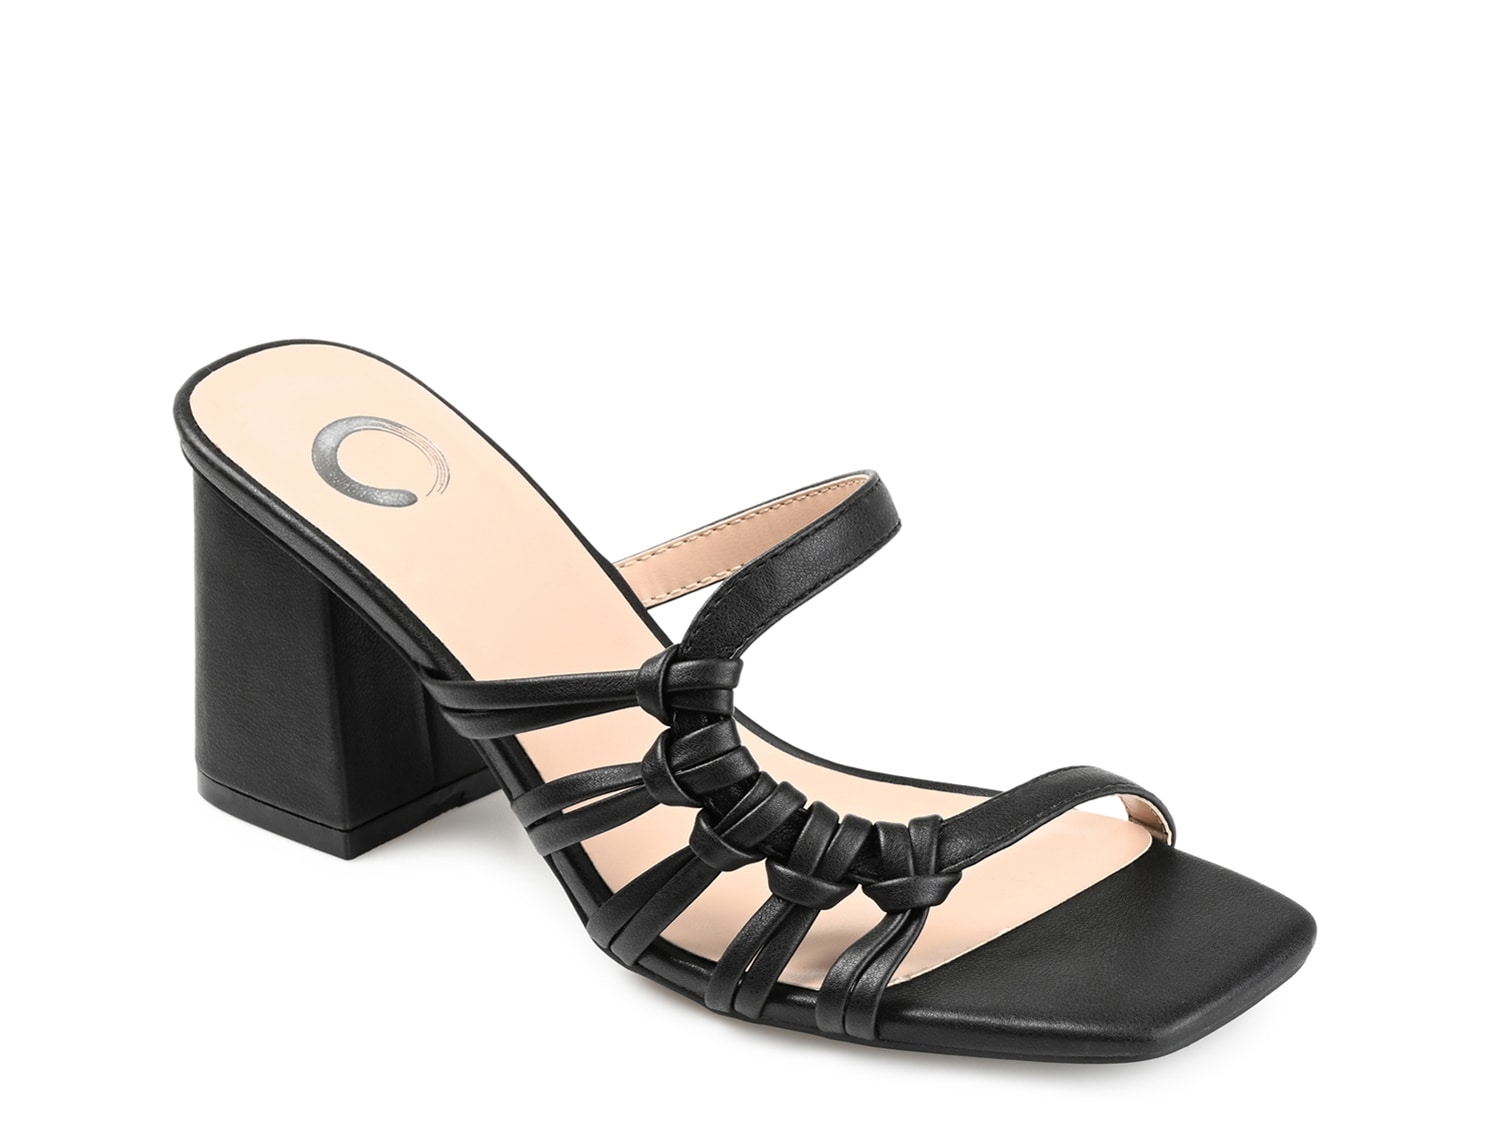 Journee Collection Emory Slide Sandal - Free Shipping | DSW